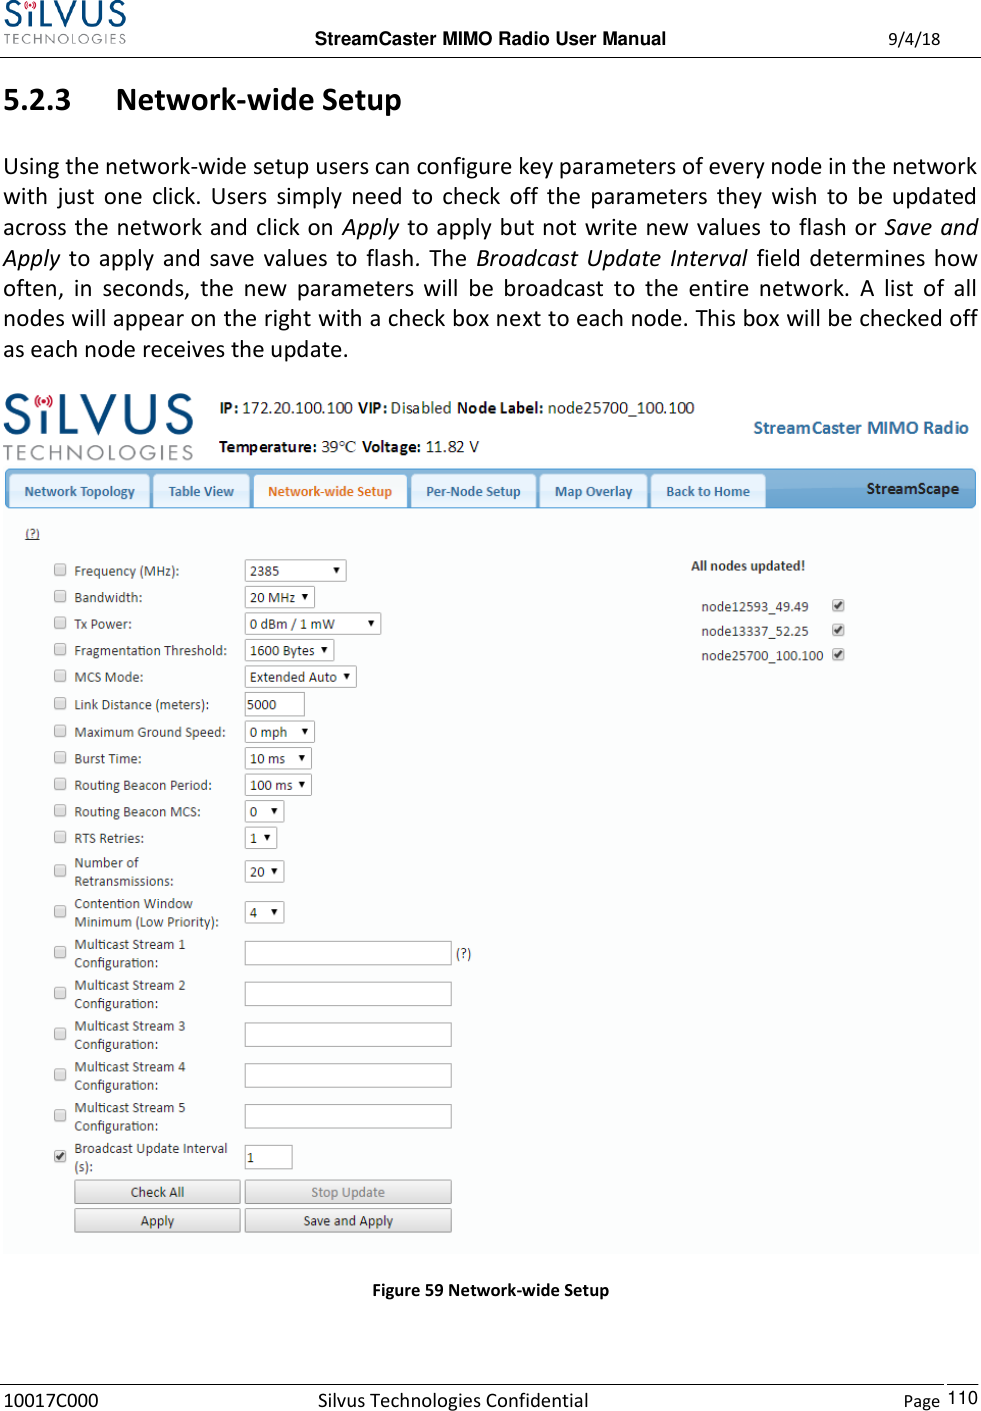  StreamCaster MIMO Radio User Manual  9/4/18 10017C000 Silvus Technologies Confidential    Page    110 5.2.3 Network-wide Setup  Using the network-wide setup users can configure key parameters of every node in the network with  just  one  click.  Users  simply  need  to  check  off  the  parameters  they  wish  to  be  updated across the network and click on  Apply to apply but not write new values to flash or Save and Apply  to  apply  and  save  values  to  flash.  The  Broadcast  Update  Interval  field determines how often,  in  seconds,  the  new  parameters  will  be  broadcast  to  the  entire  network.  A  list  of  all nodes will appear on the right with a check box next to each node. This box will be checked off as each node receives the update.  Figure 59 Network-wide Setup  